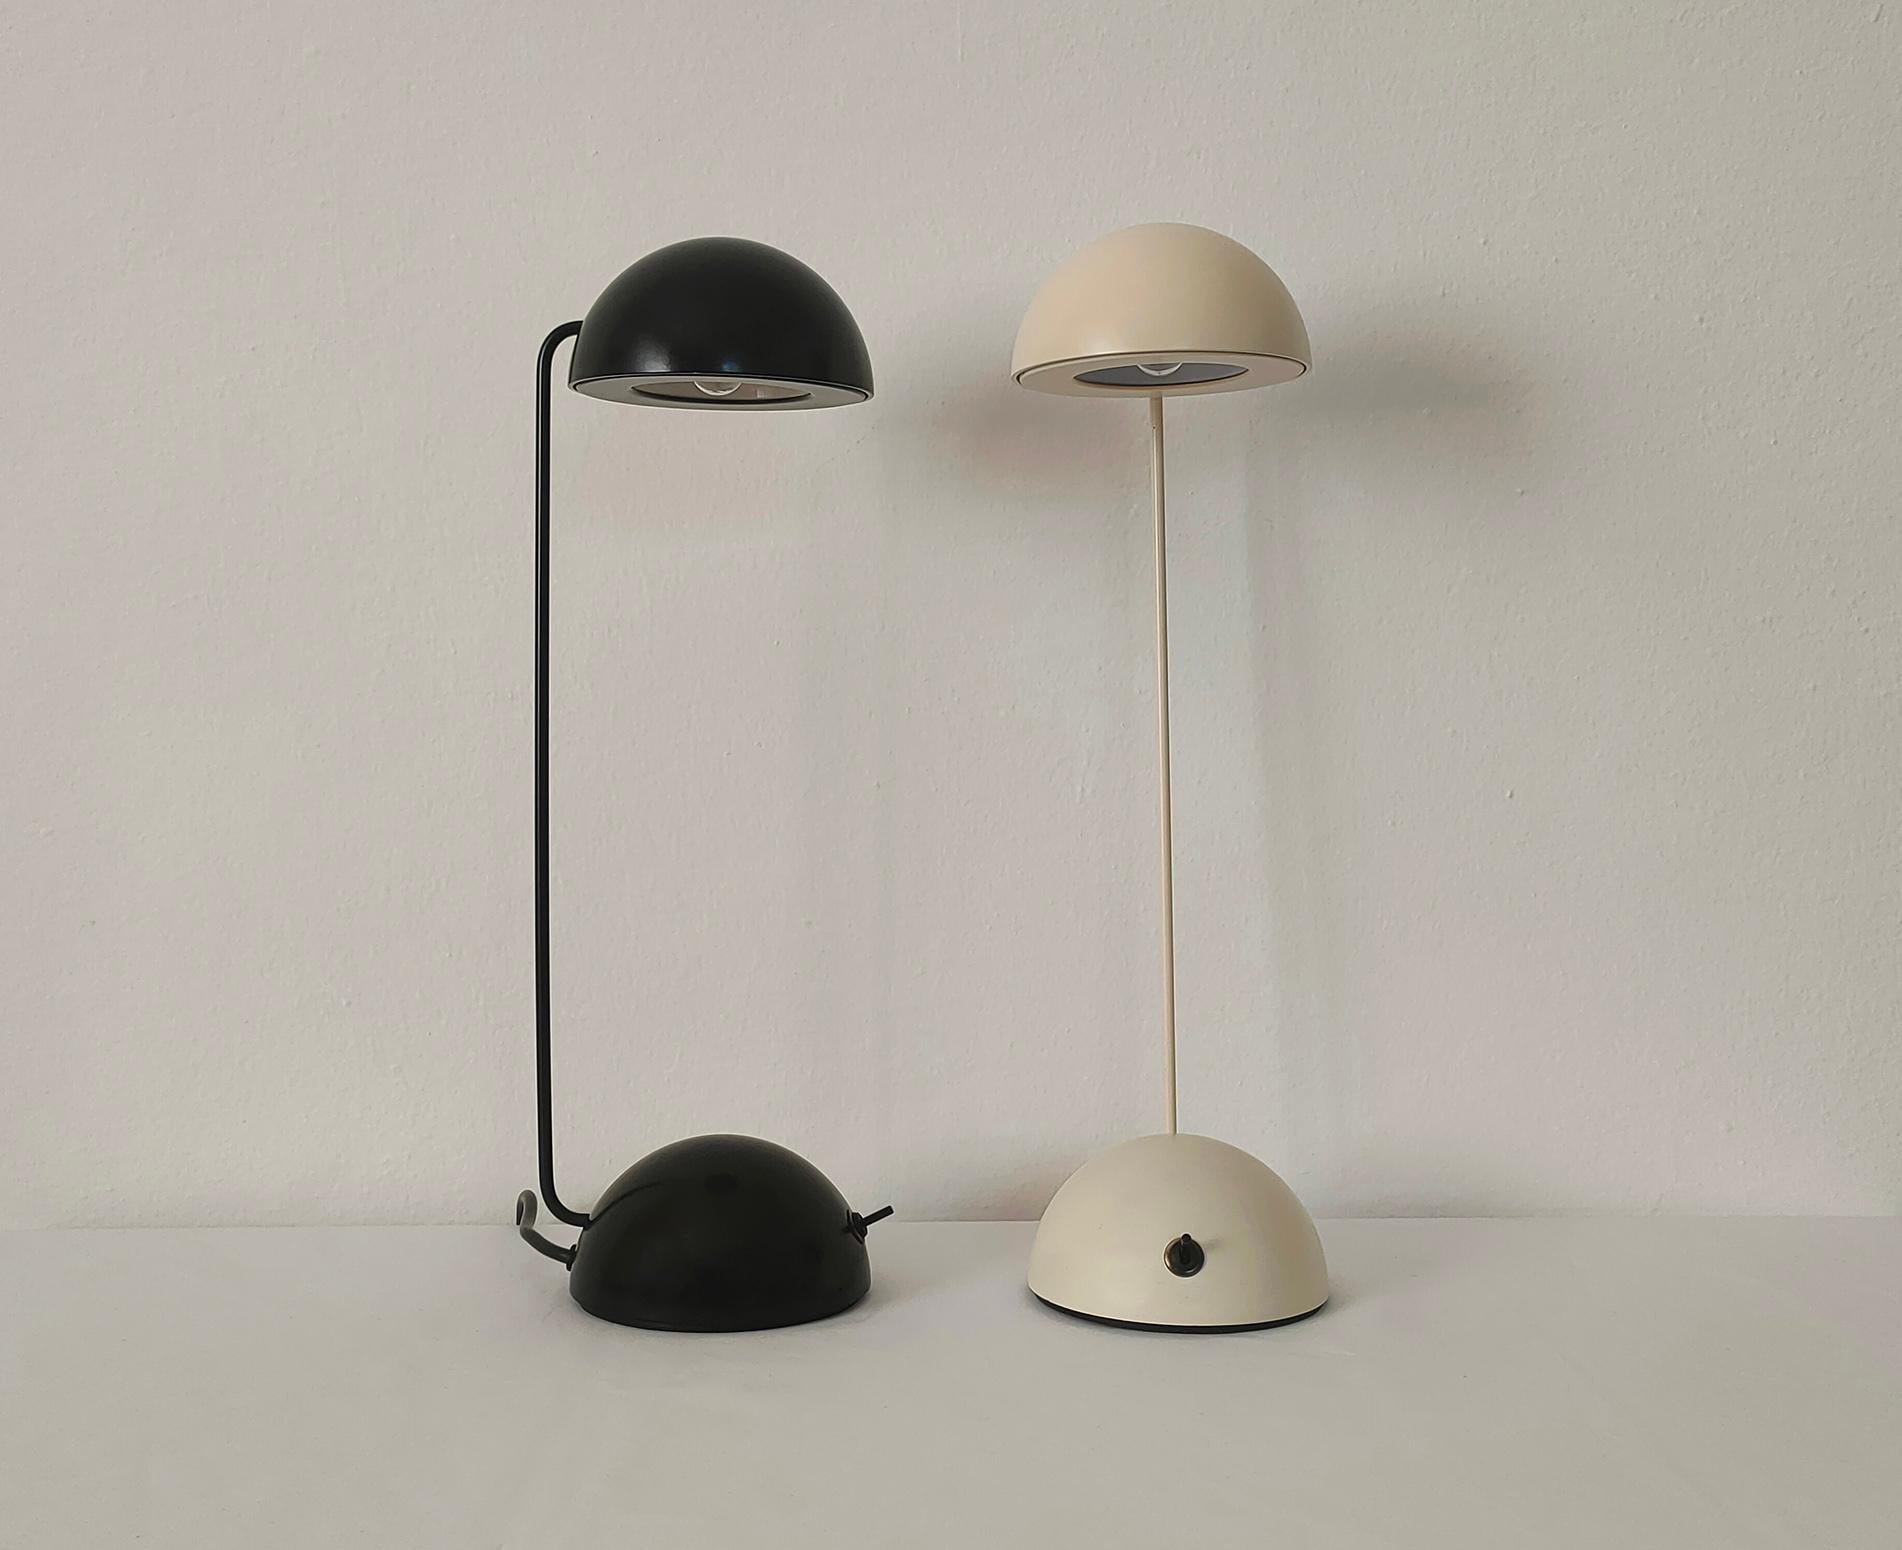 A pair of Minikini table lamps in white-cream enameled metal and in black enameled metal.
The Minikini is a lamp with a clean and refined design, highly versatile, and also with an adjustable stem and lampshade (they can assume different